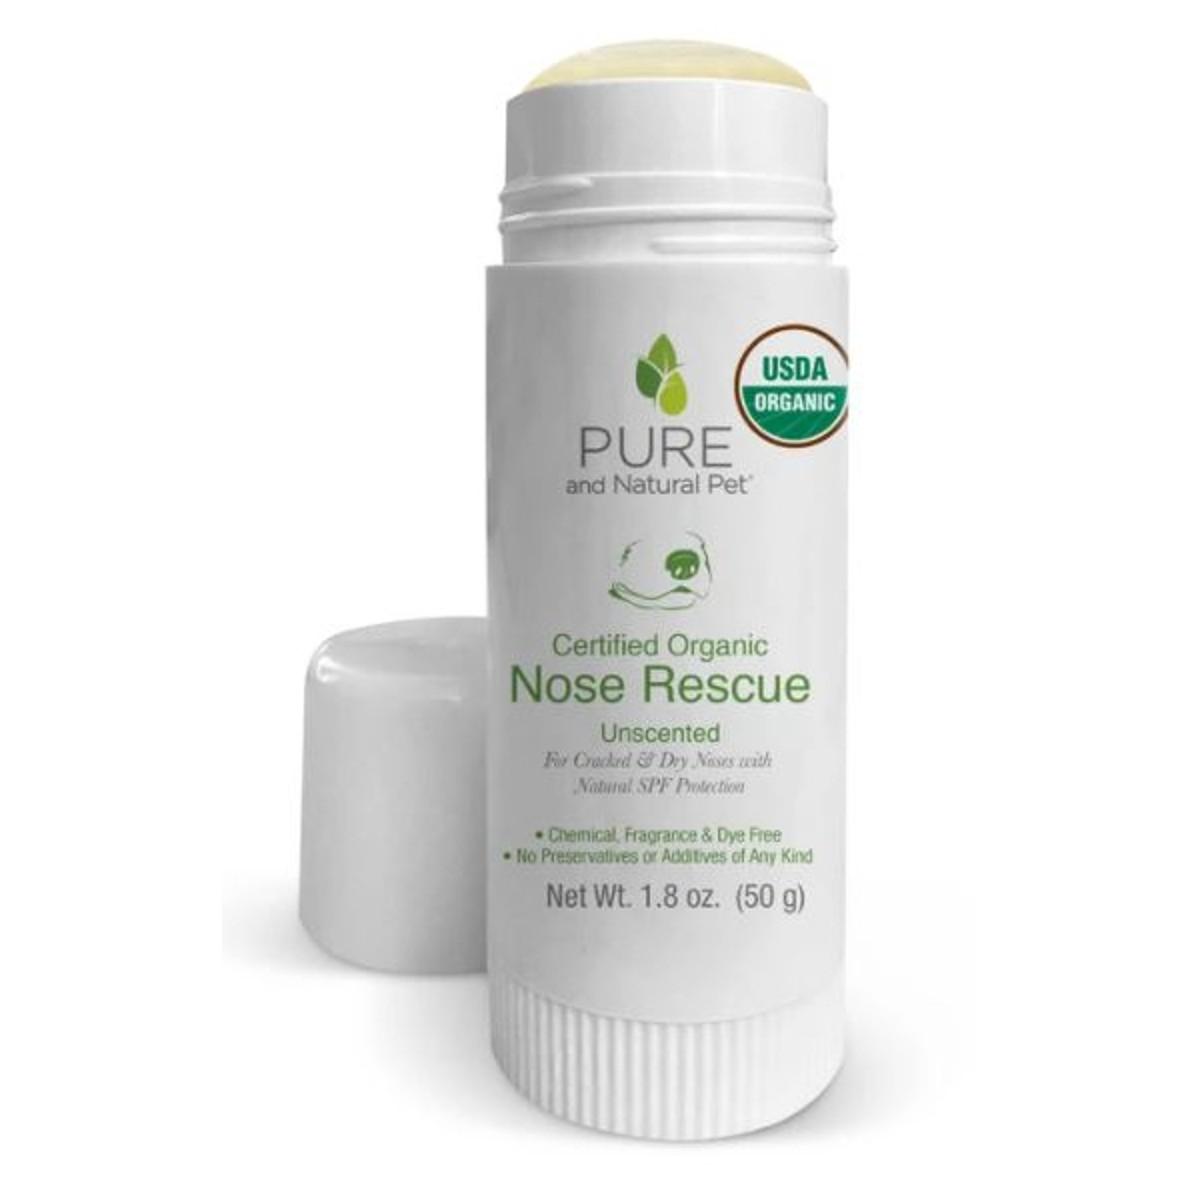 Pure and Natural Pet Organic Moisturizing Nose Rescue - Unscented